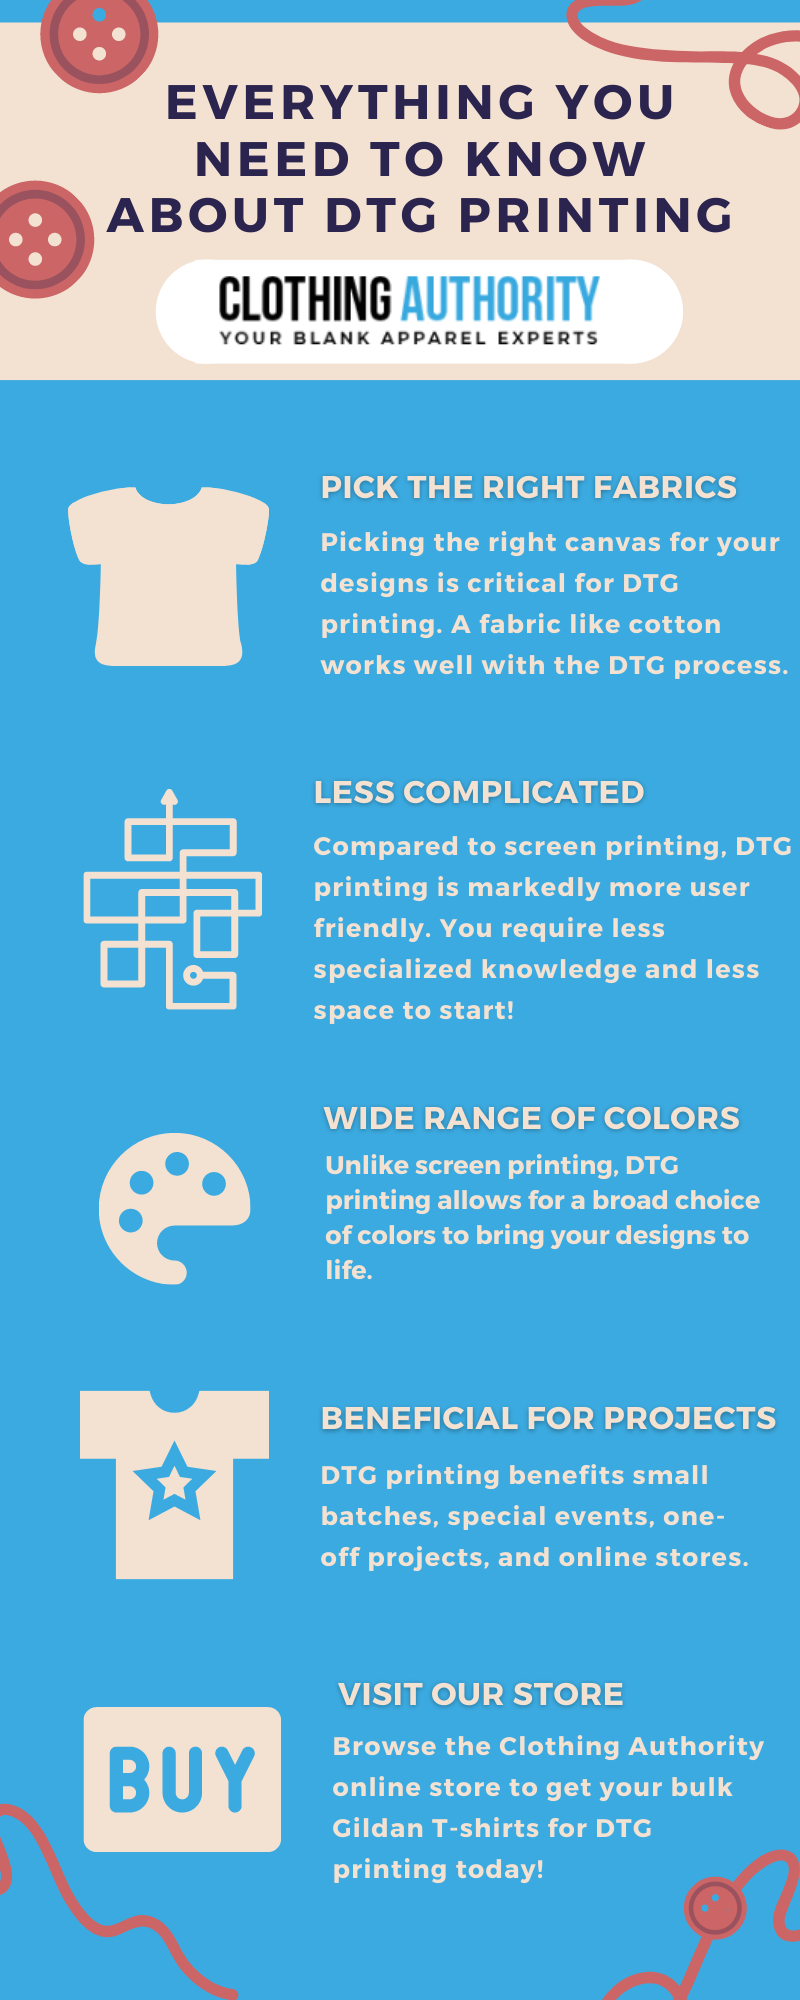 Image: DTG Printing explained - Everything you need to know - Clothing Authority blog.